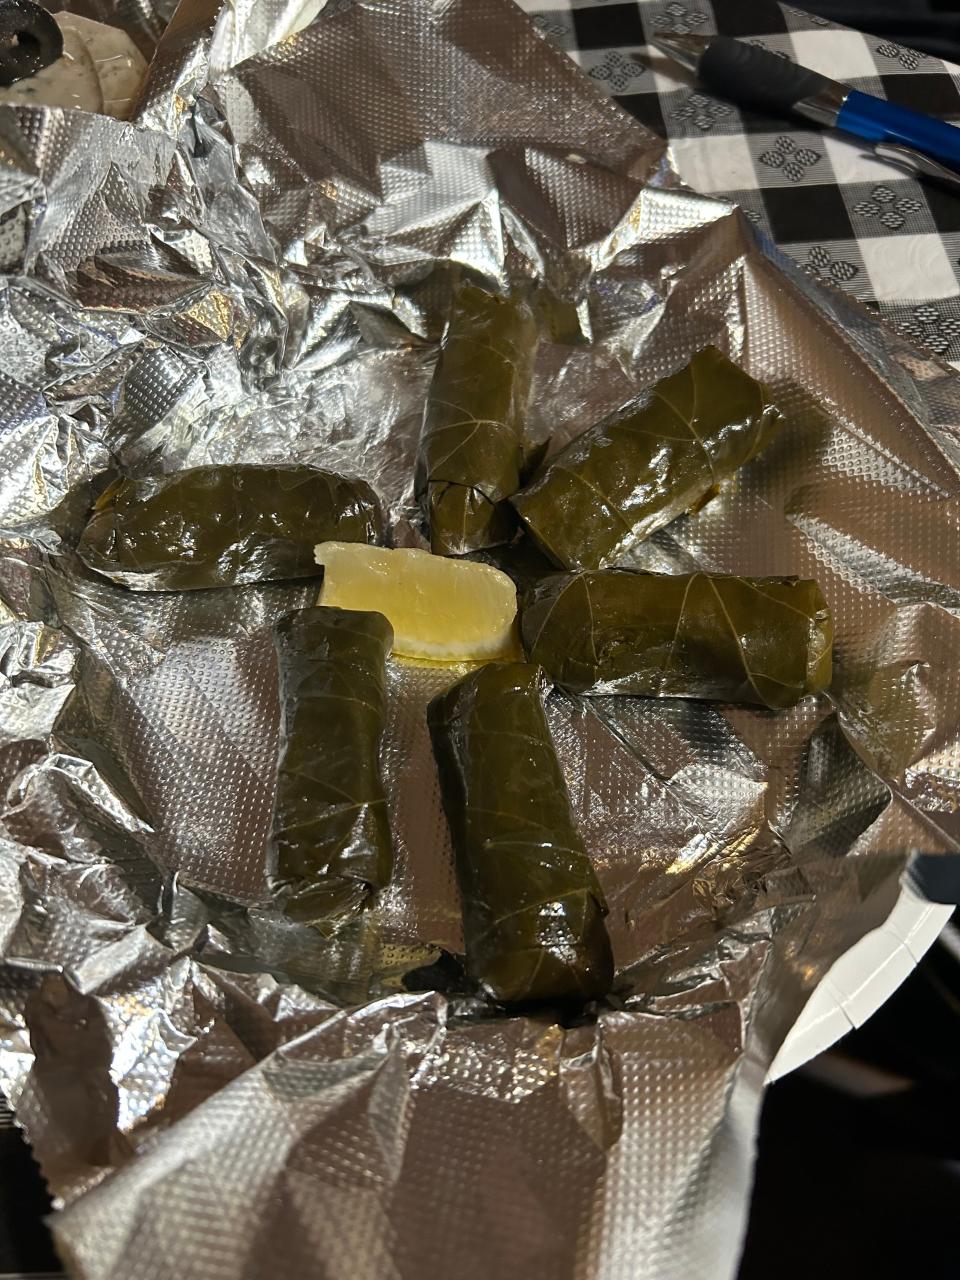 Vegetarian dolmades at Mid-East Cafe and Restaurant in Akron.